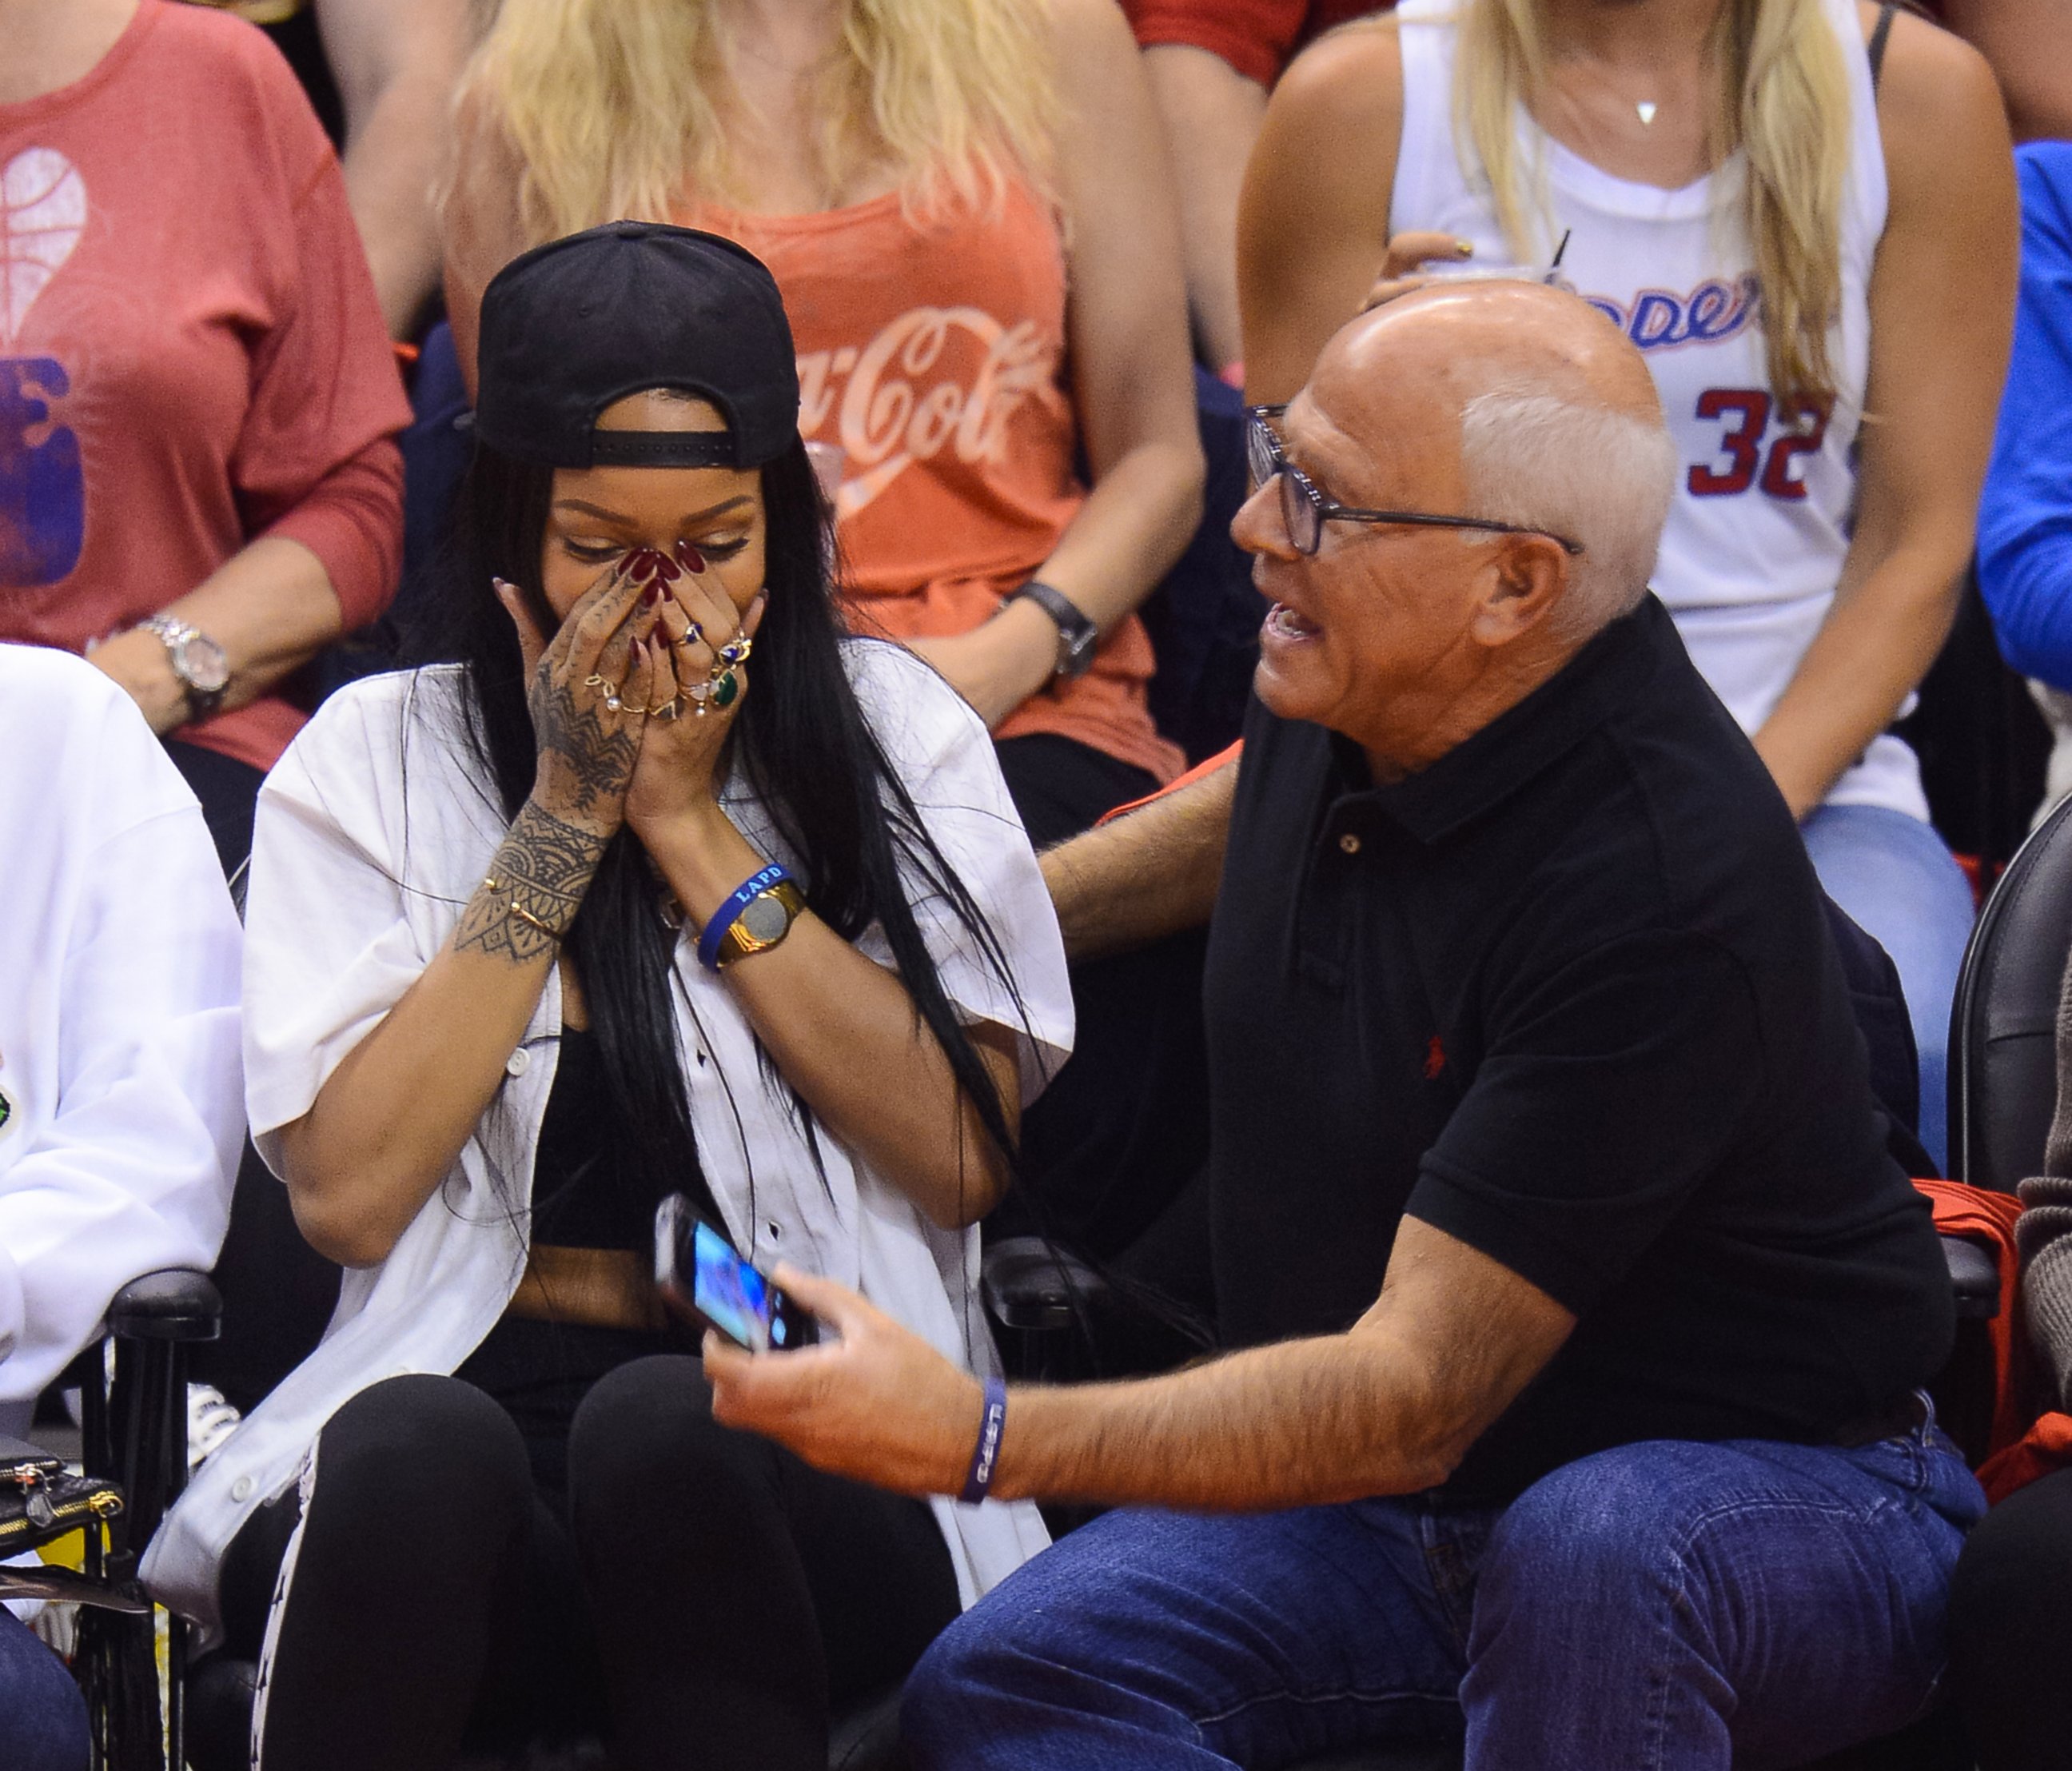 PHOTO: Rihanna attends an NBA playoff game between the Oklahoma City Thunder and the Los Angeles Clippers on May 9, 201.  